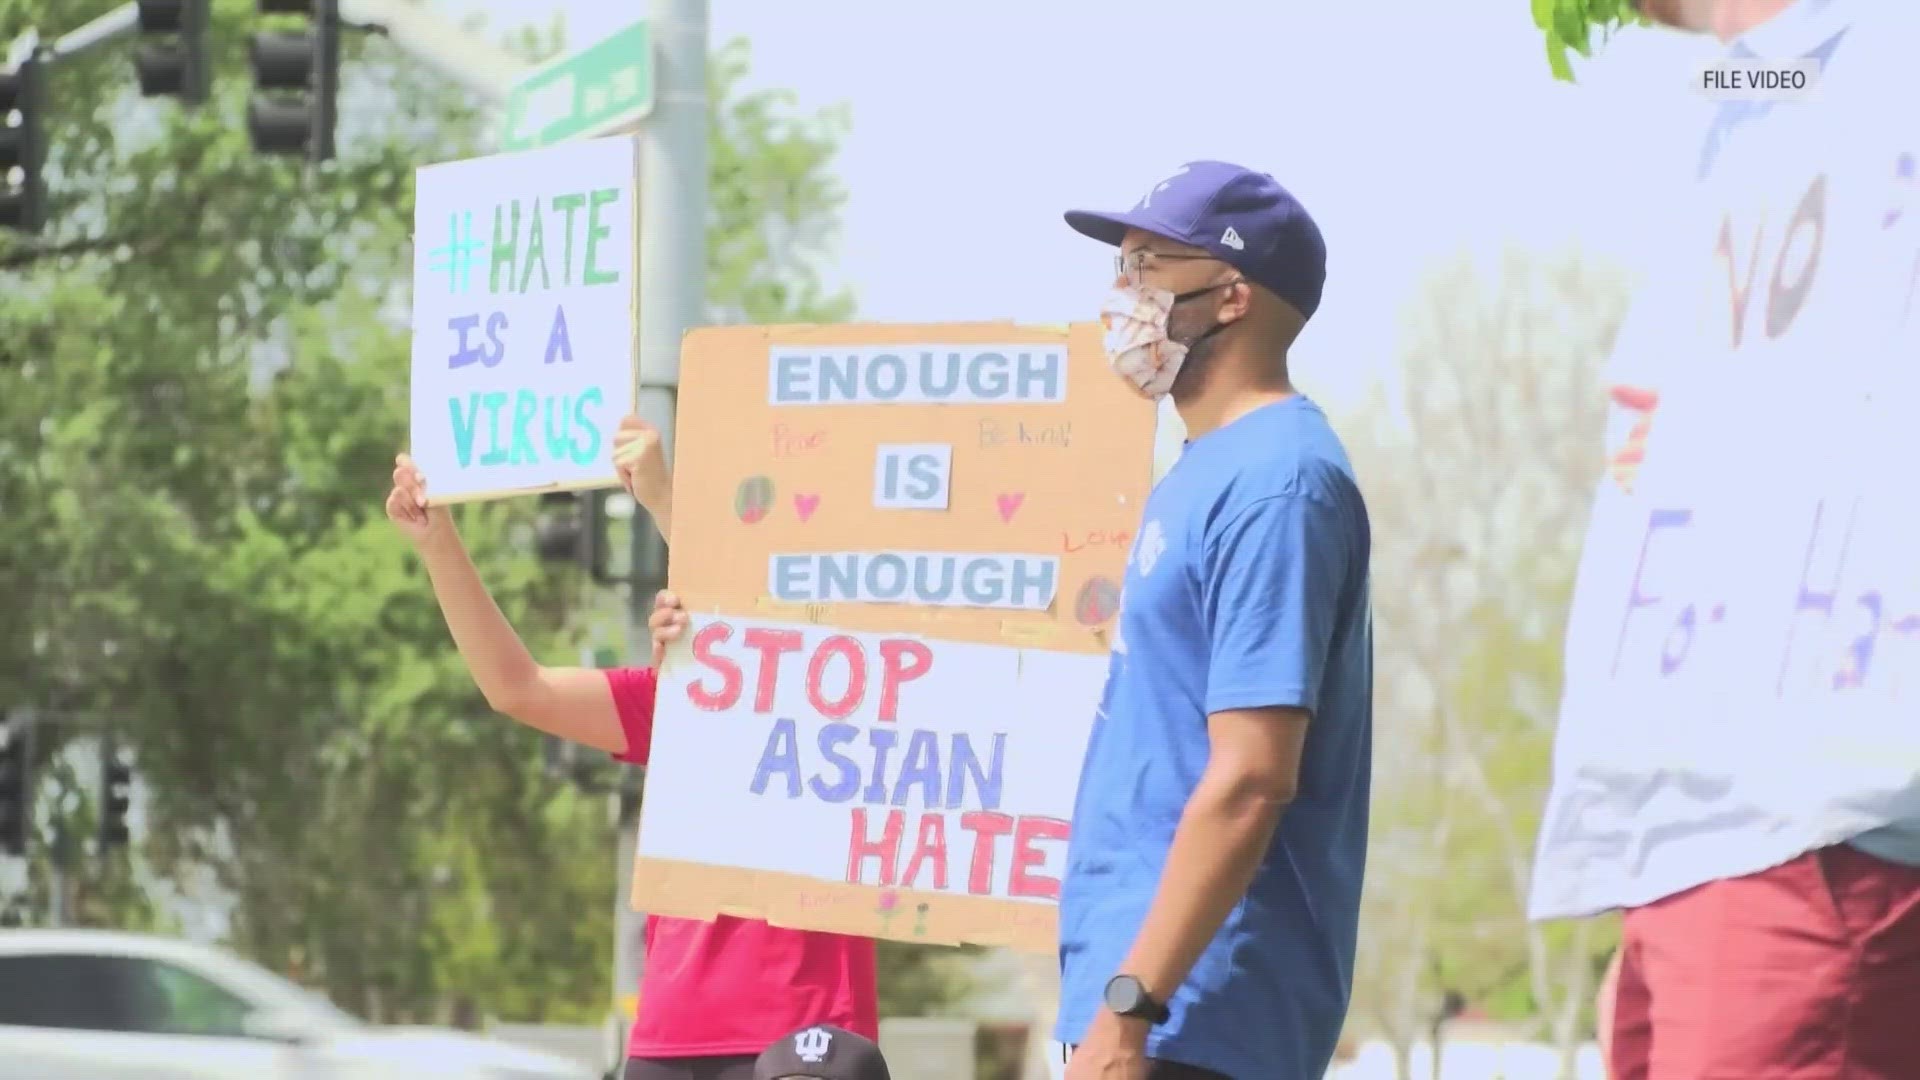 The new hate crimes report shows the number of reported anti-Asian hate crimes dropped from 247 to 140 from 2021 to 2022.